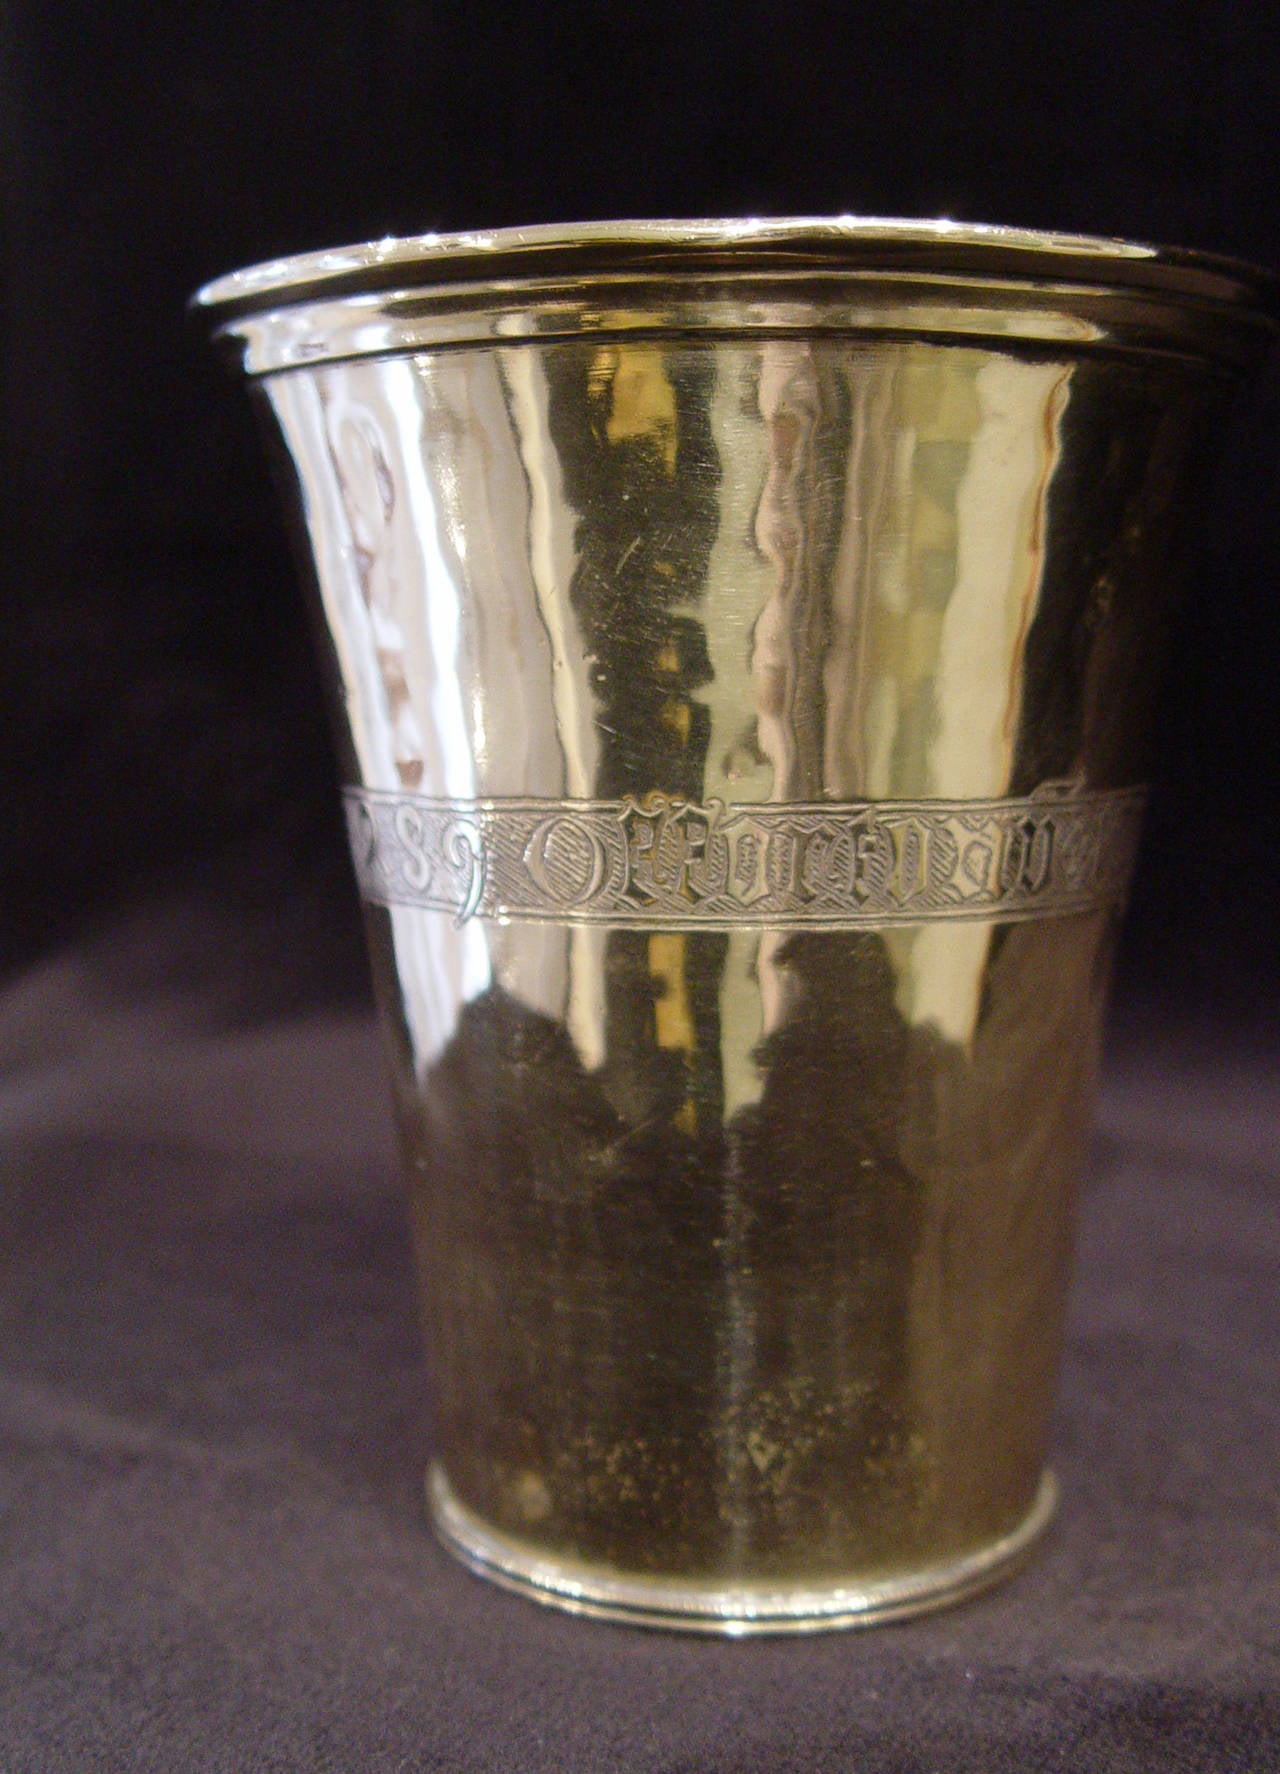 Engraved copper goblet, dated 1480, with a mark underneath.
Gothic writing
Ex. Nicolas Landau collection

The brass-ware / dinanderie : « an art in the making « 
 In the Meuse valley, the knowledge of Dinandiers and their workshops of metal